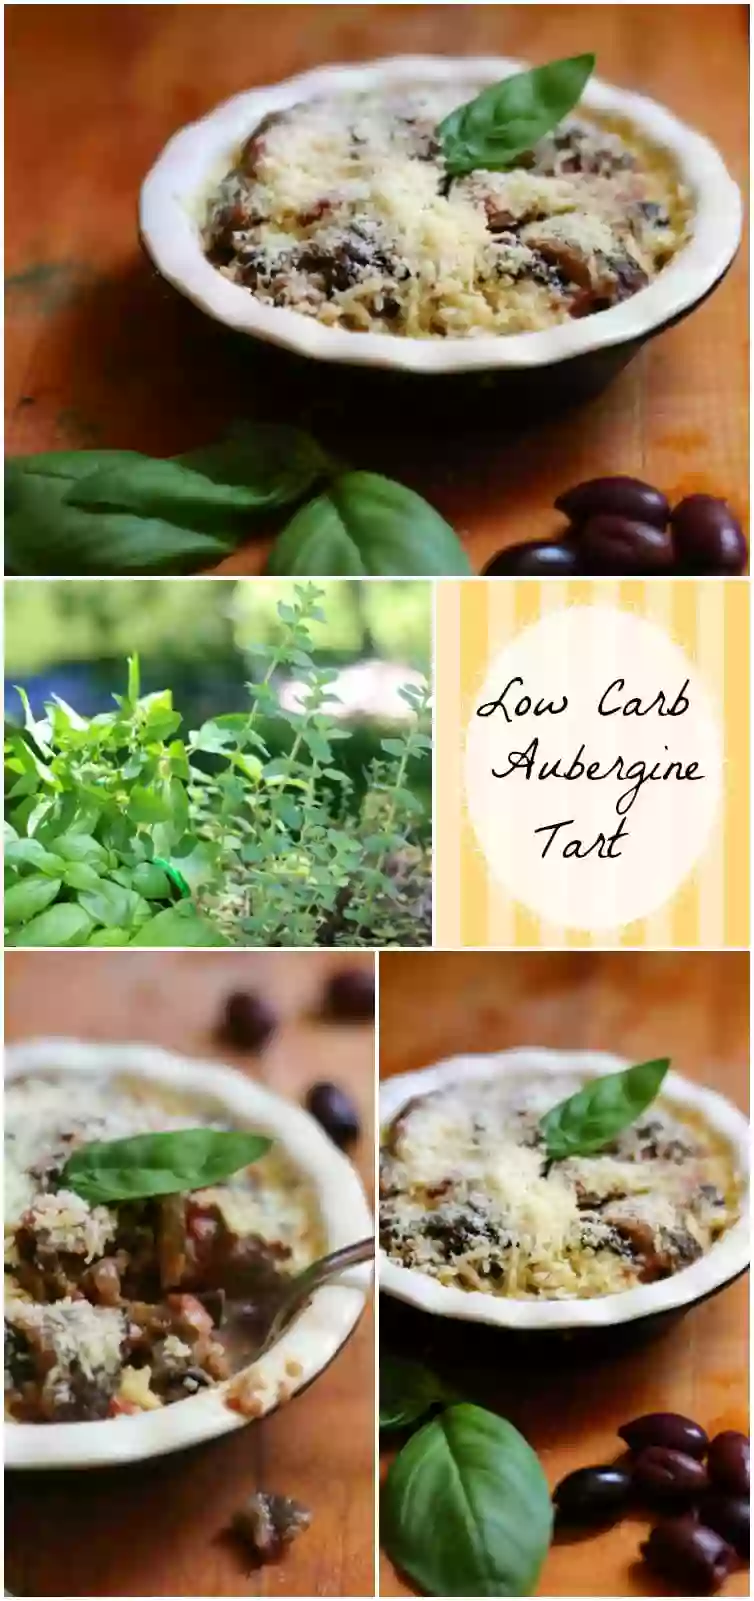 This aubergine tart (eggplant) is a low carb copy of the one I loved in Paris! Just 7.2 net carbs per serving and it's so good! from Lowcarb-ology.com